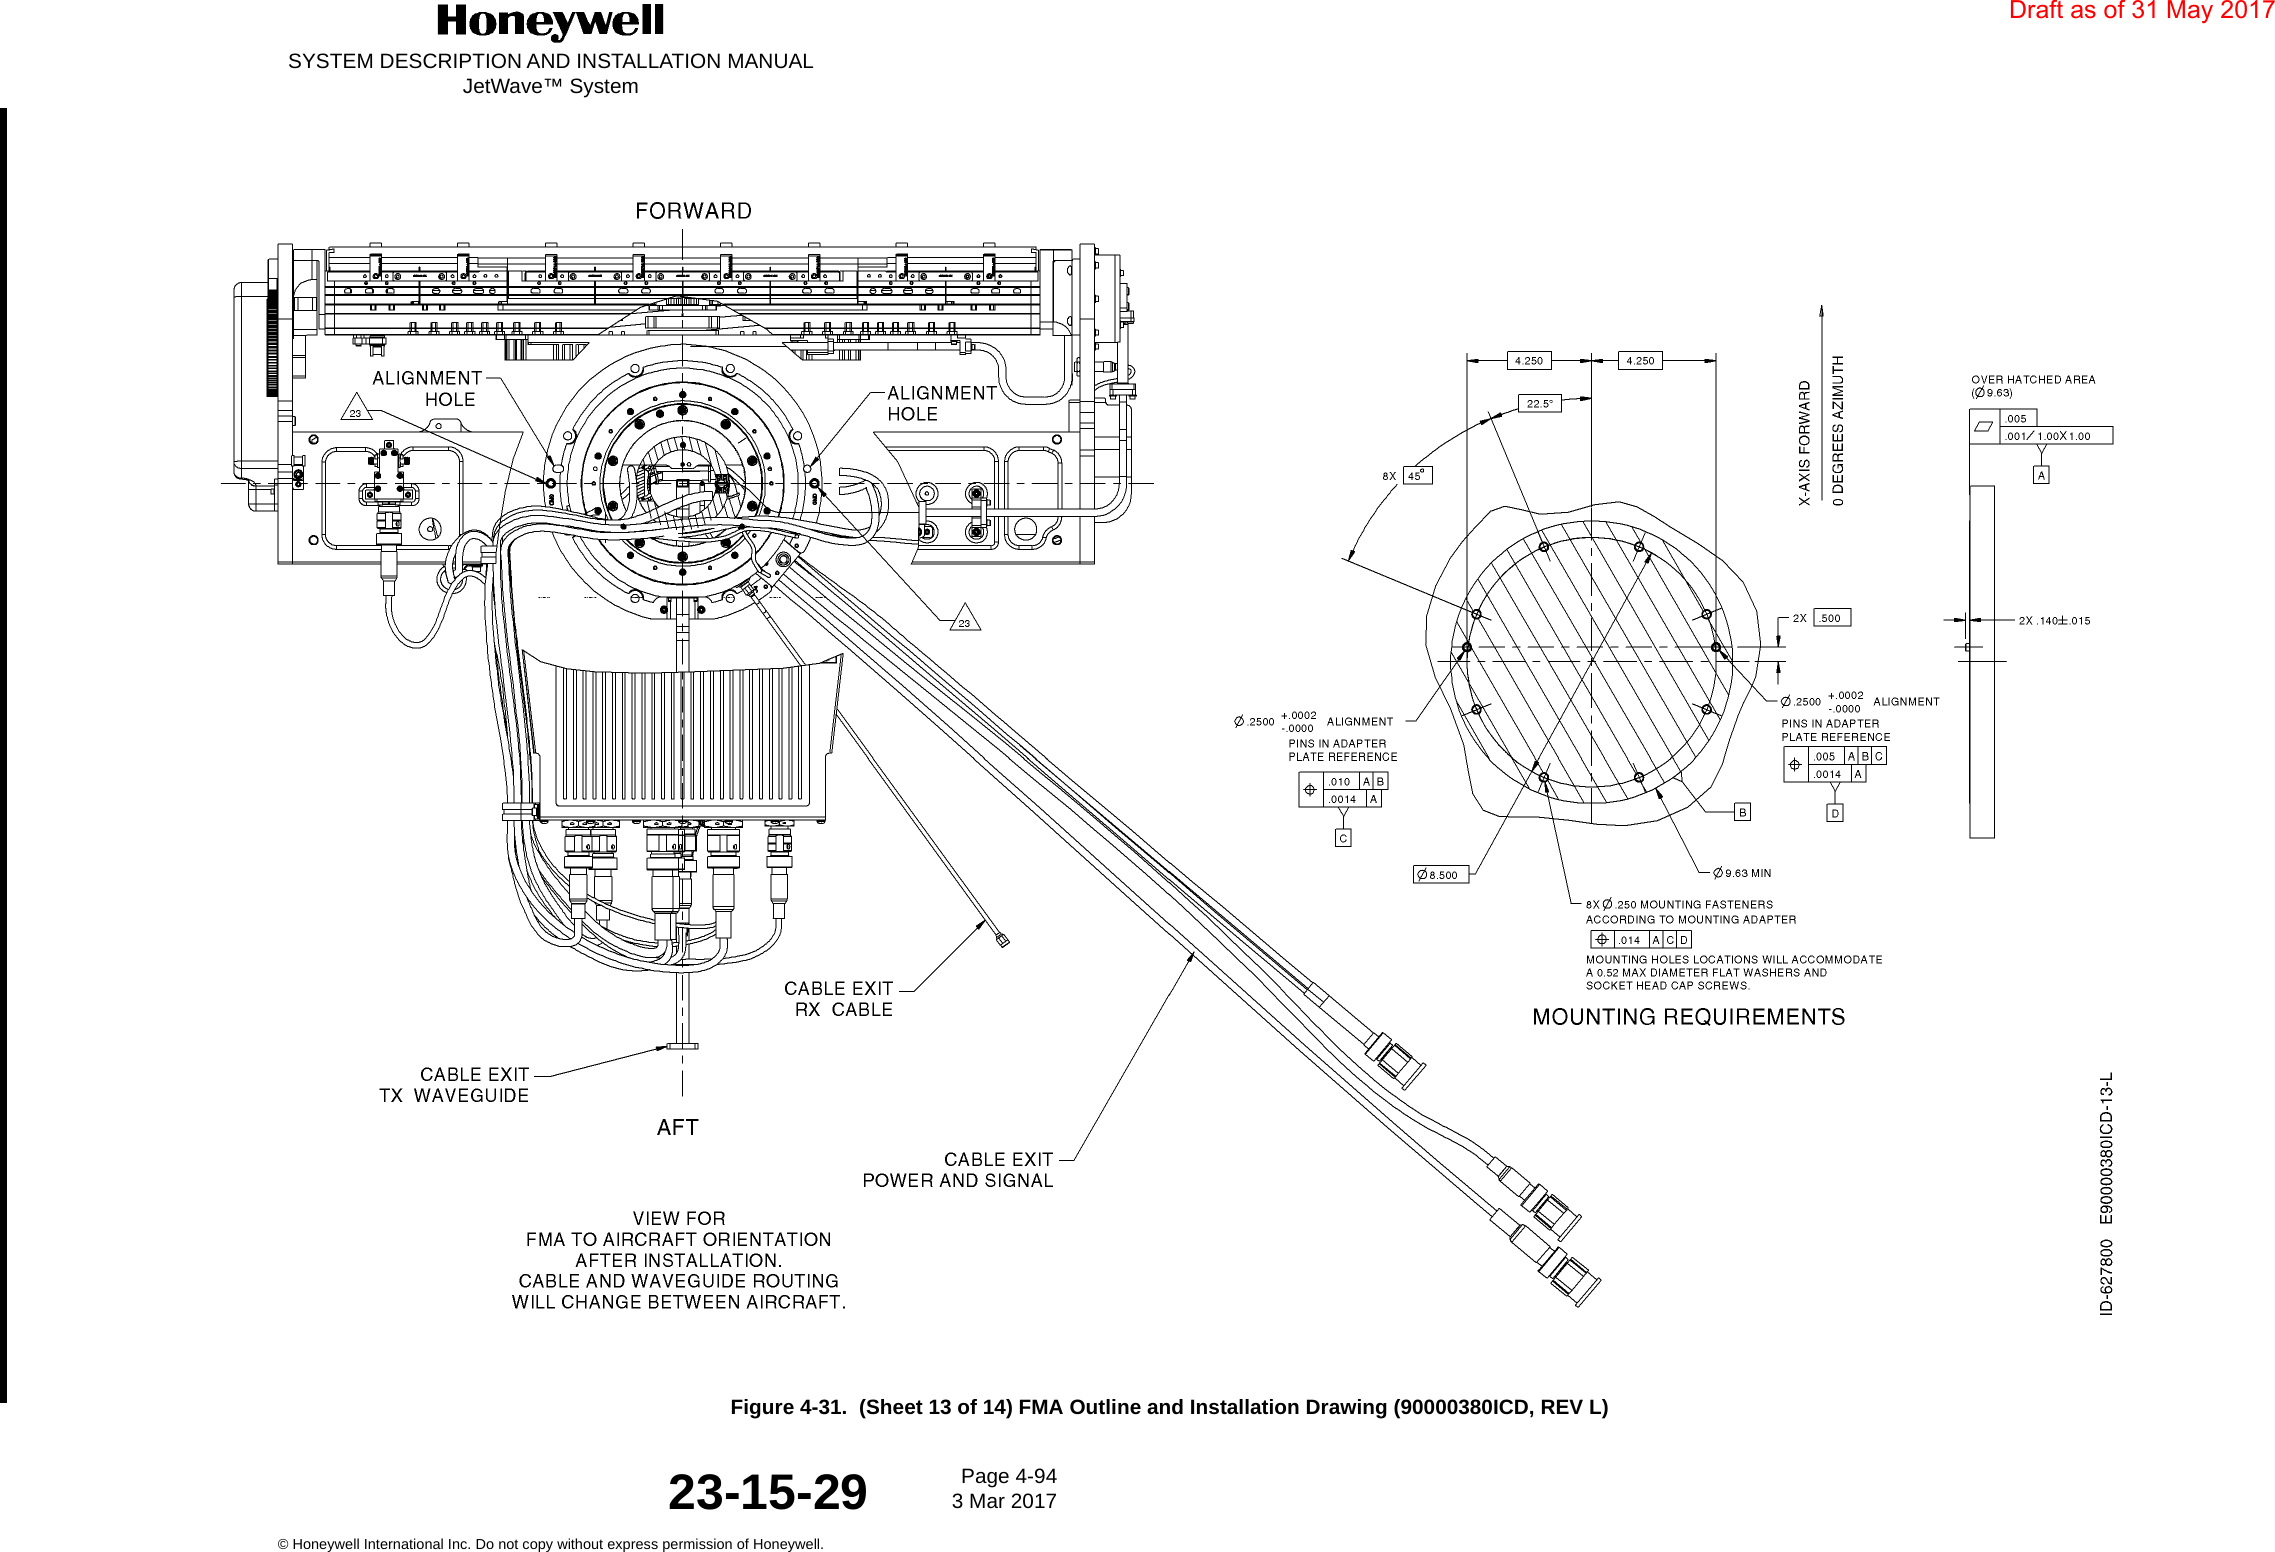 SYSTEM DESCRIPTION AND INSTALLATION MANUALJetWave™ SystemPage 4-94 3 Mar 2017© Honeywell International Inc. Do not copy without express permission of Honeywell.23-15-29Figure 4-31.  (Sheet 13 of 14) FMA Outline and Installation Drawing (90000380ICD, REV L)Draft as of 31 May 2017